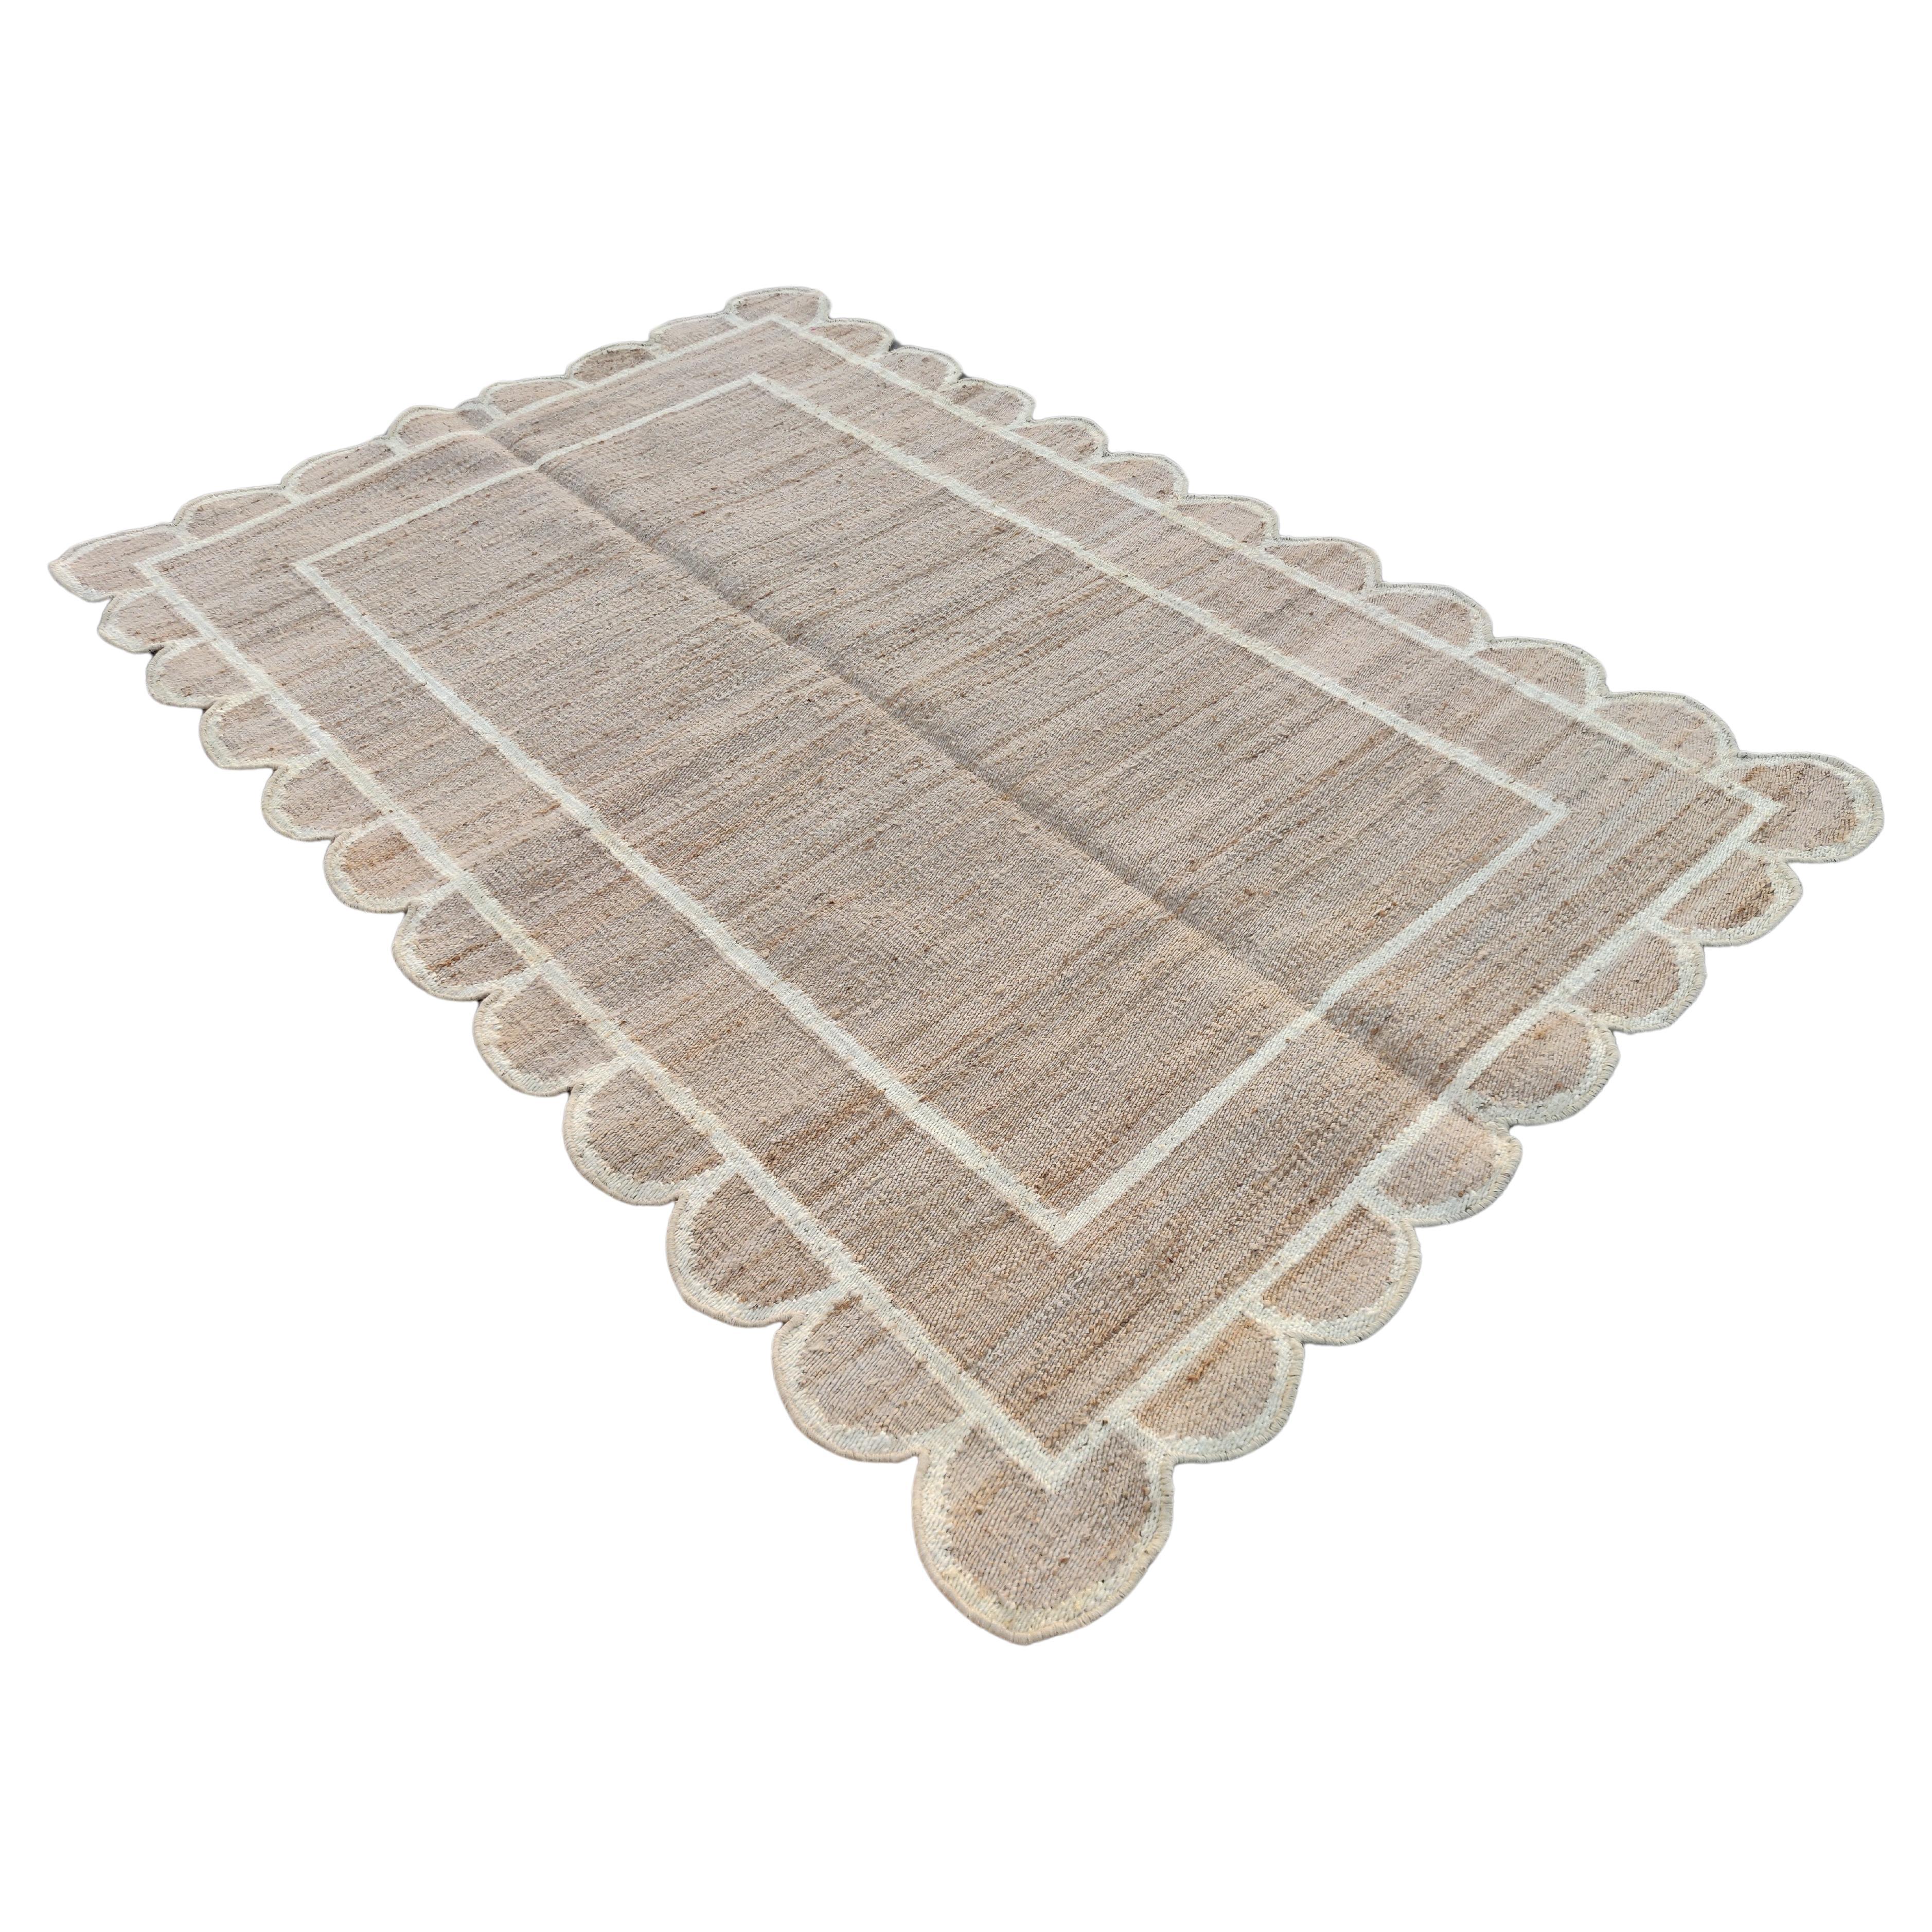 Handmade Jute Area Flat Weave Rug, 4x6 Jute And White Scalloped Indian Dhurrie For Sale